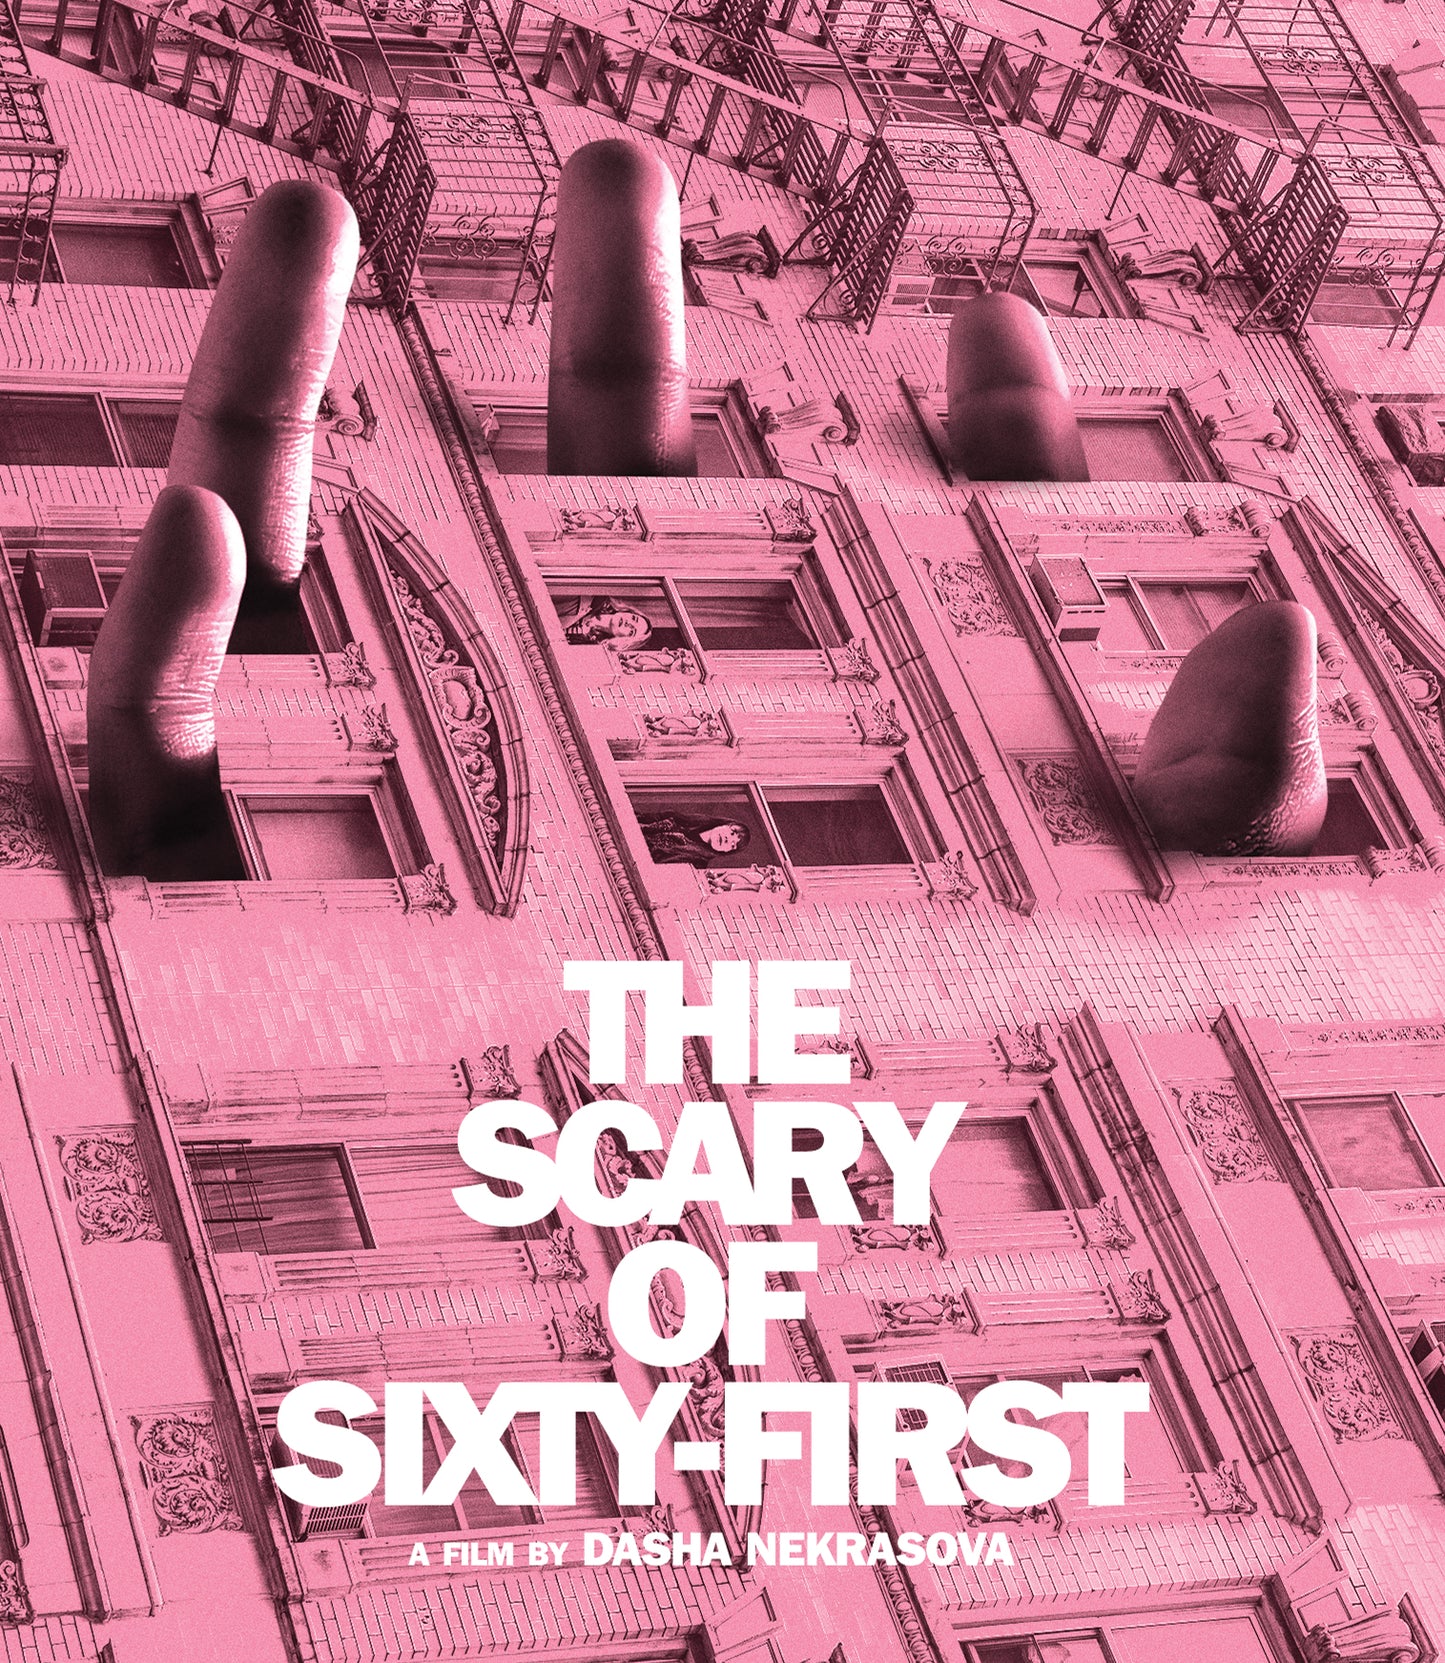 Scary of Sixty-First [Blu-ray] cover art